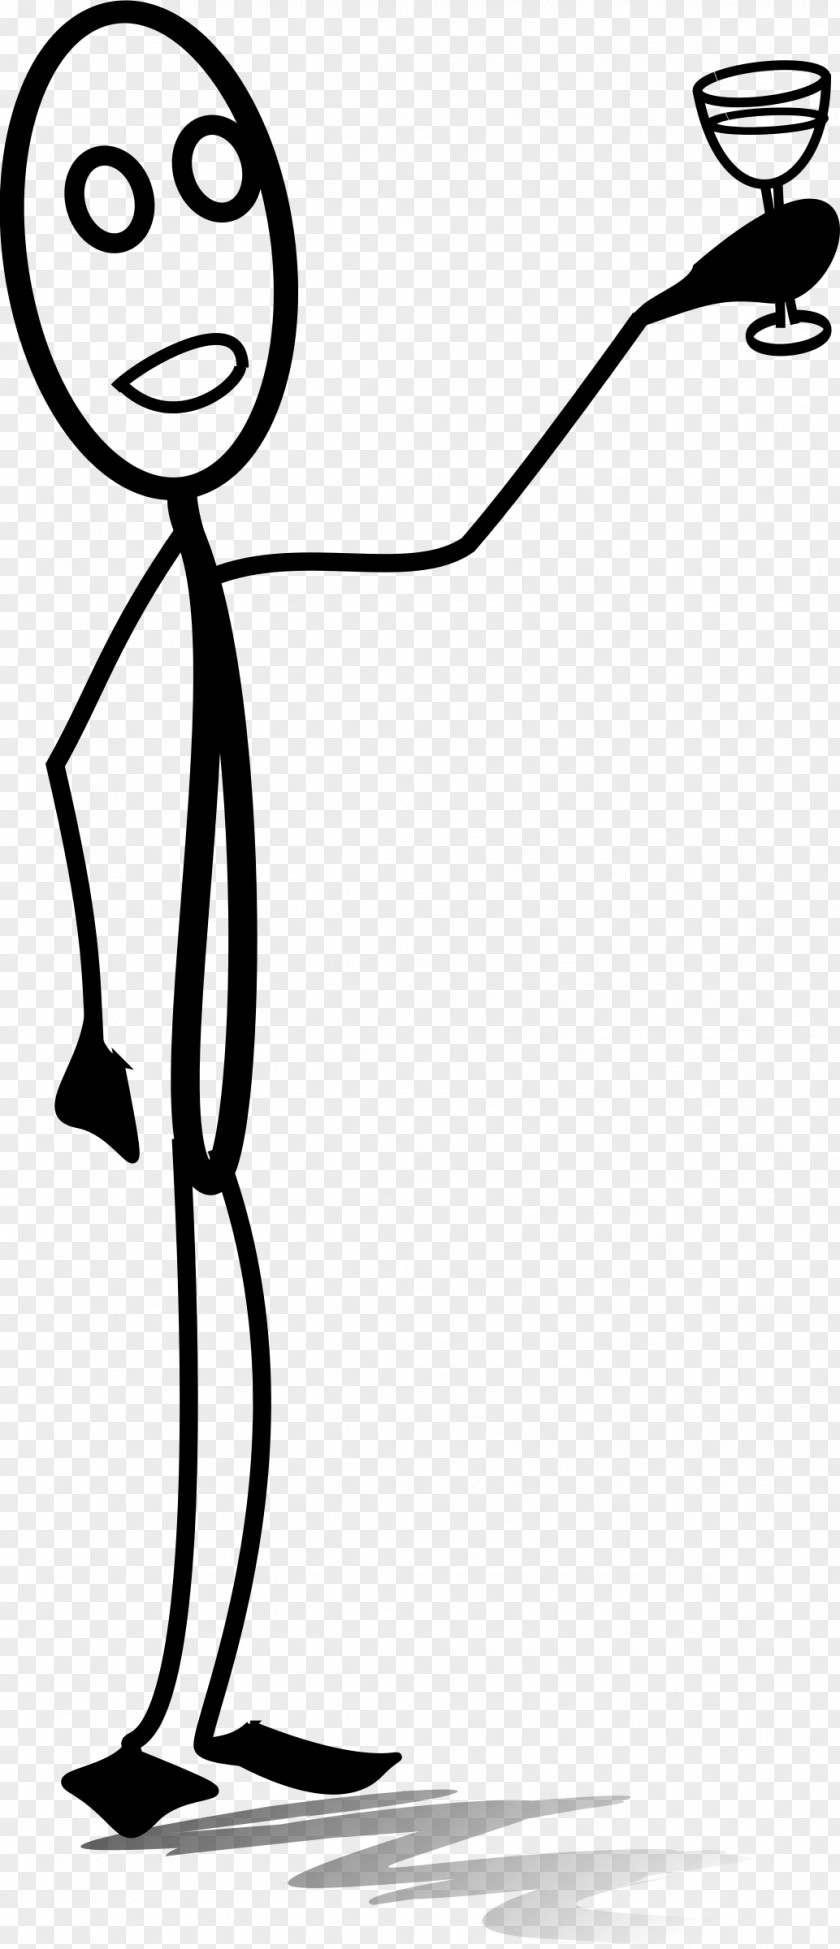 Toast Stick Figure Download PNG